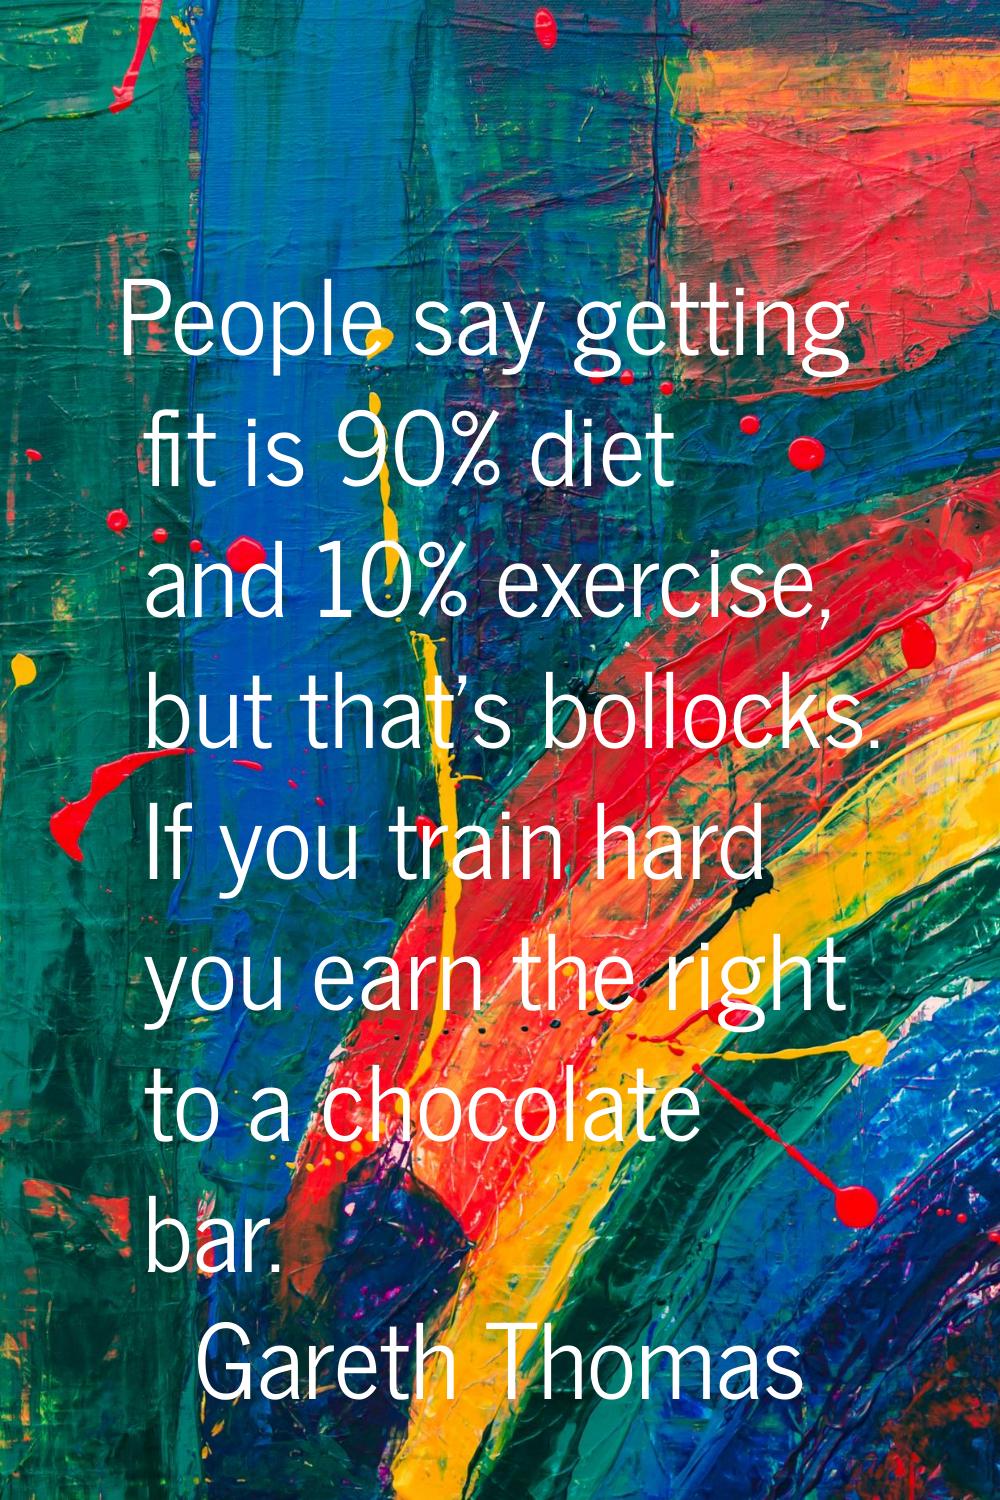 People say getting fit is 90% diet and 10% exercise, but that's bollocks. If you train hard you ear